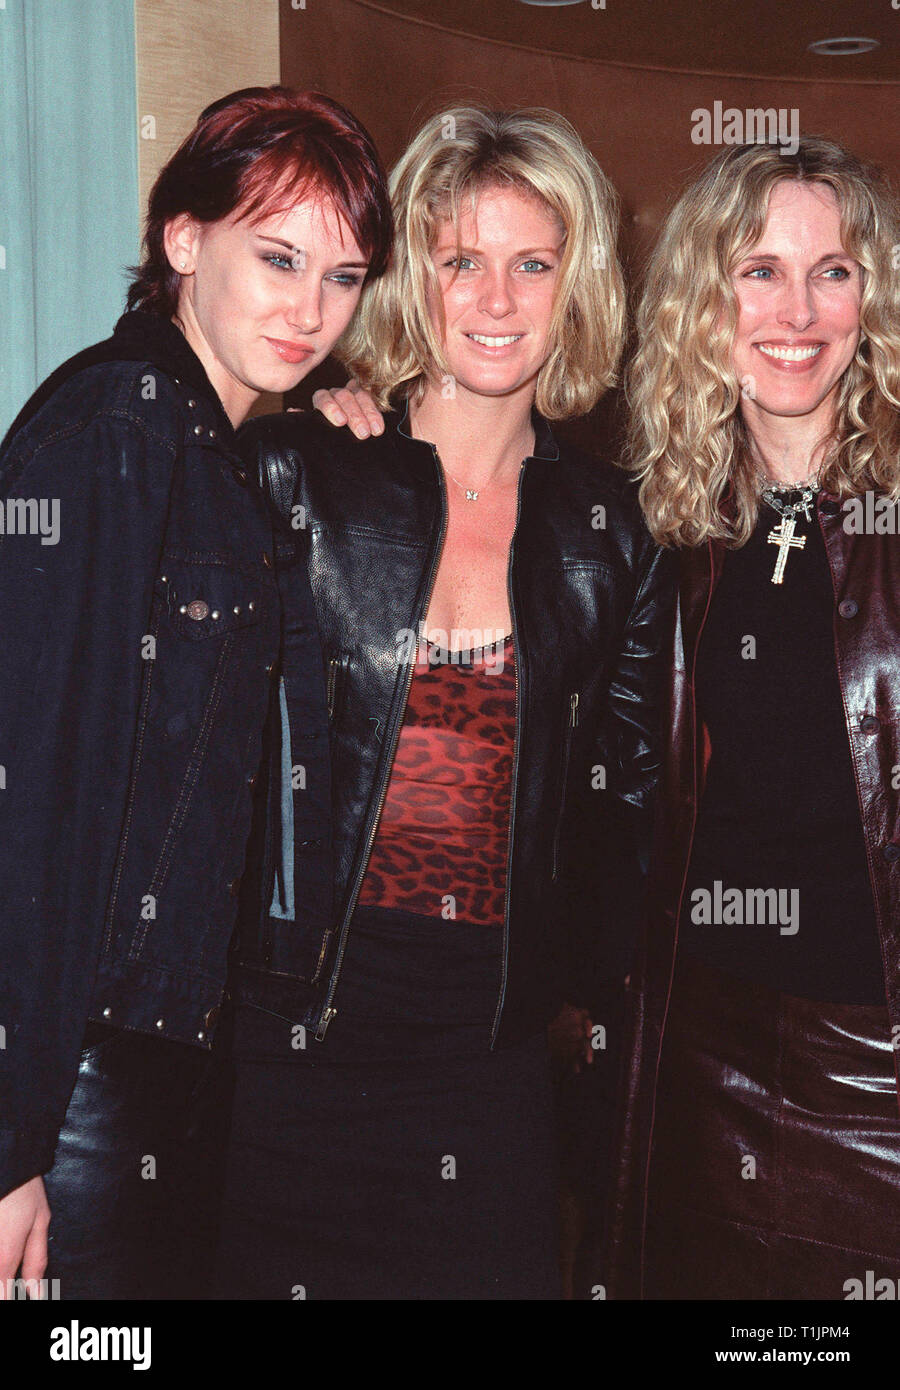 LOS ANGELES, CA. November 05, 1999:   Model Rachel Hunter (centre) & Alana Stewart (right) - Former Wives Of Pop Star Rod Stewart - With Rod & Alana's Daughter Kimberly Stewart  at reception in Los Angeles for photo exhibit by Jade Jagger (daughter of Mick Jagger) and her boyfriend Dan McMillan. © Paul Smith / Featureflash Stock Photo